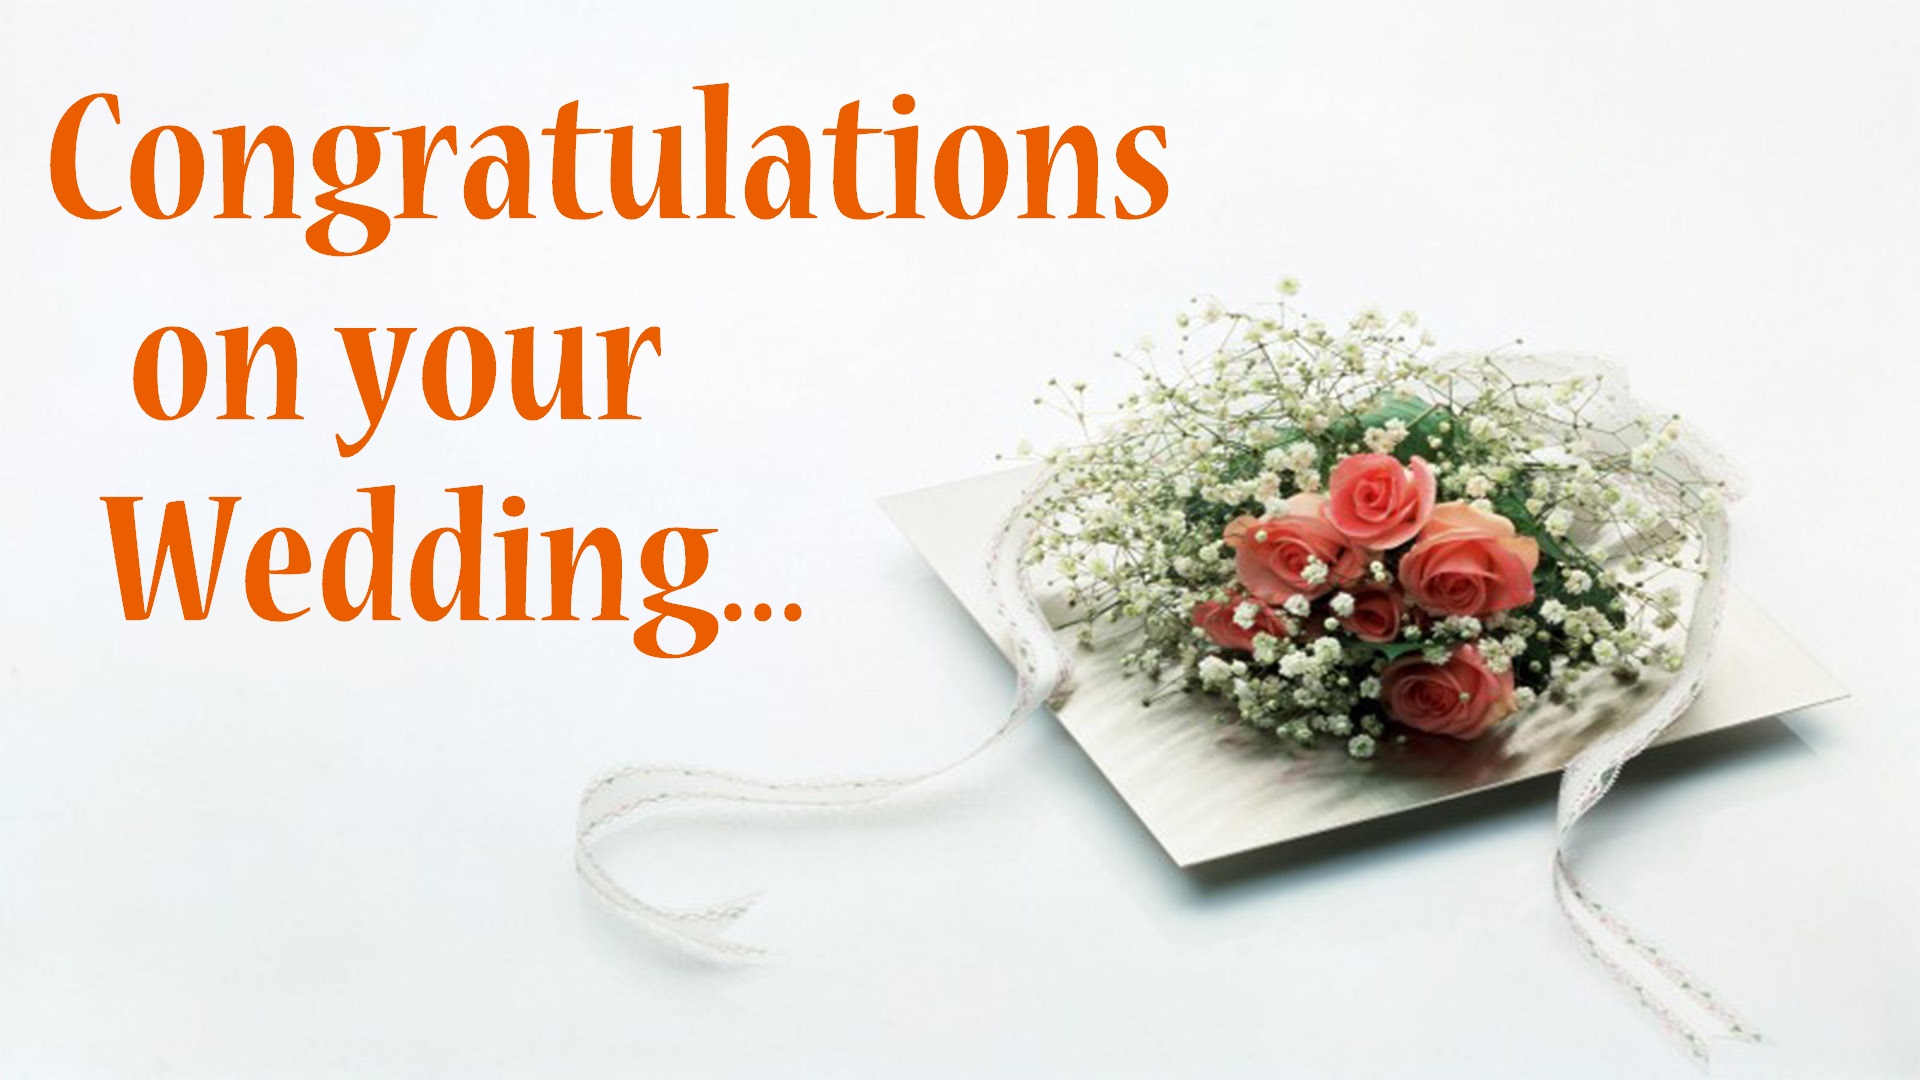 Wedding Congratulations Image & HD Picture. Wedding Greeting Cards